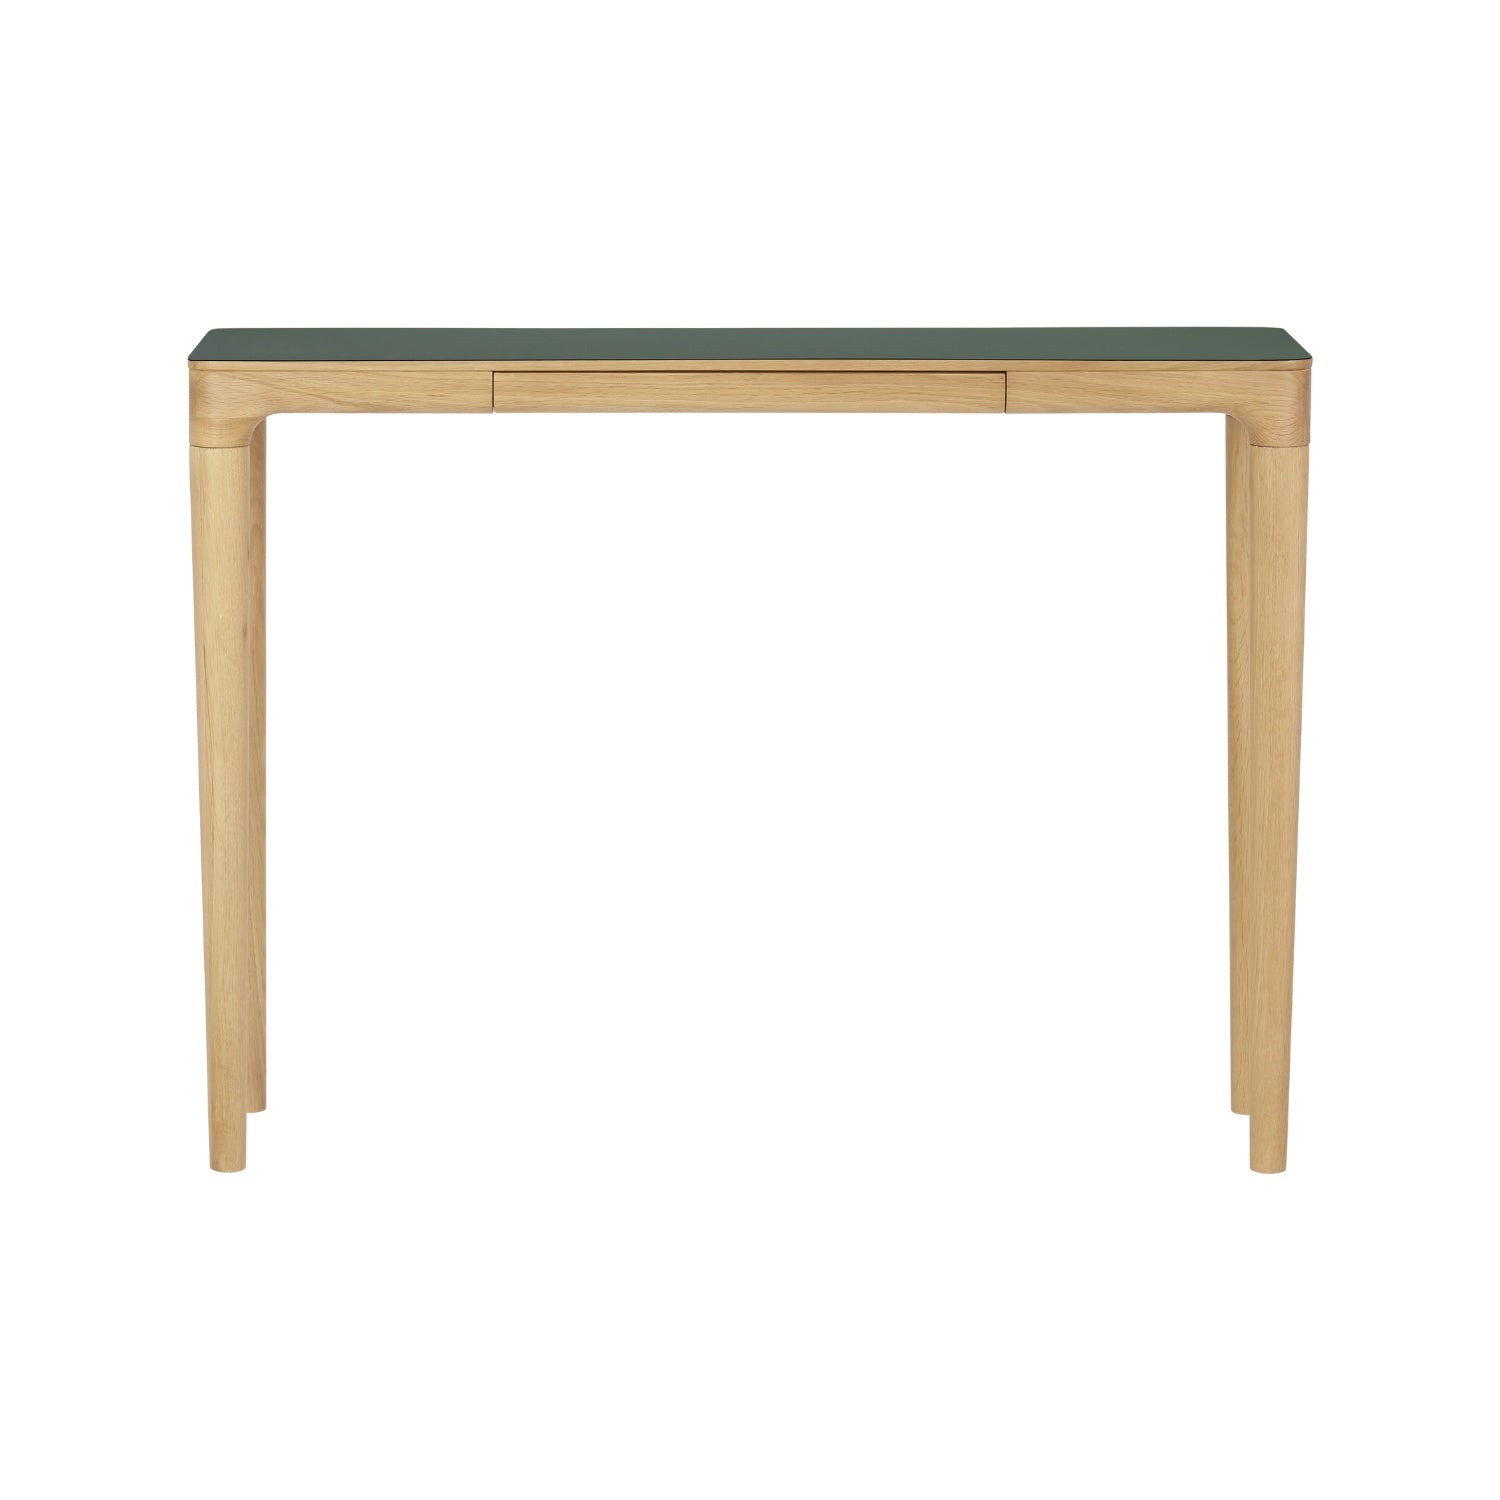 HEART'N'SOUL - Console Table